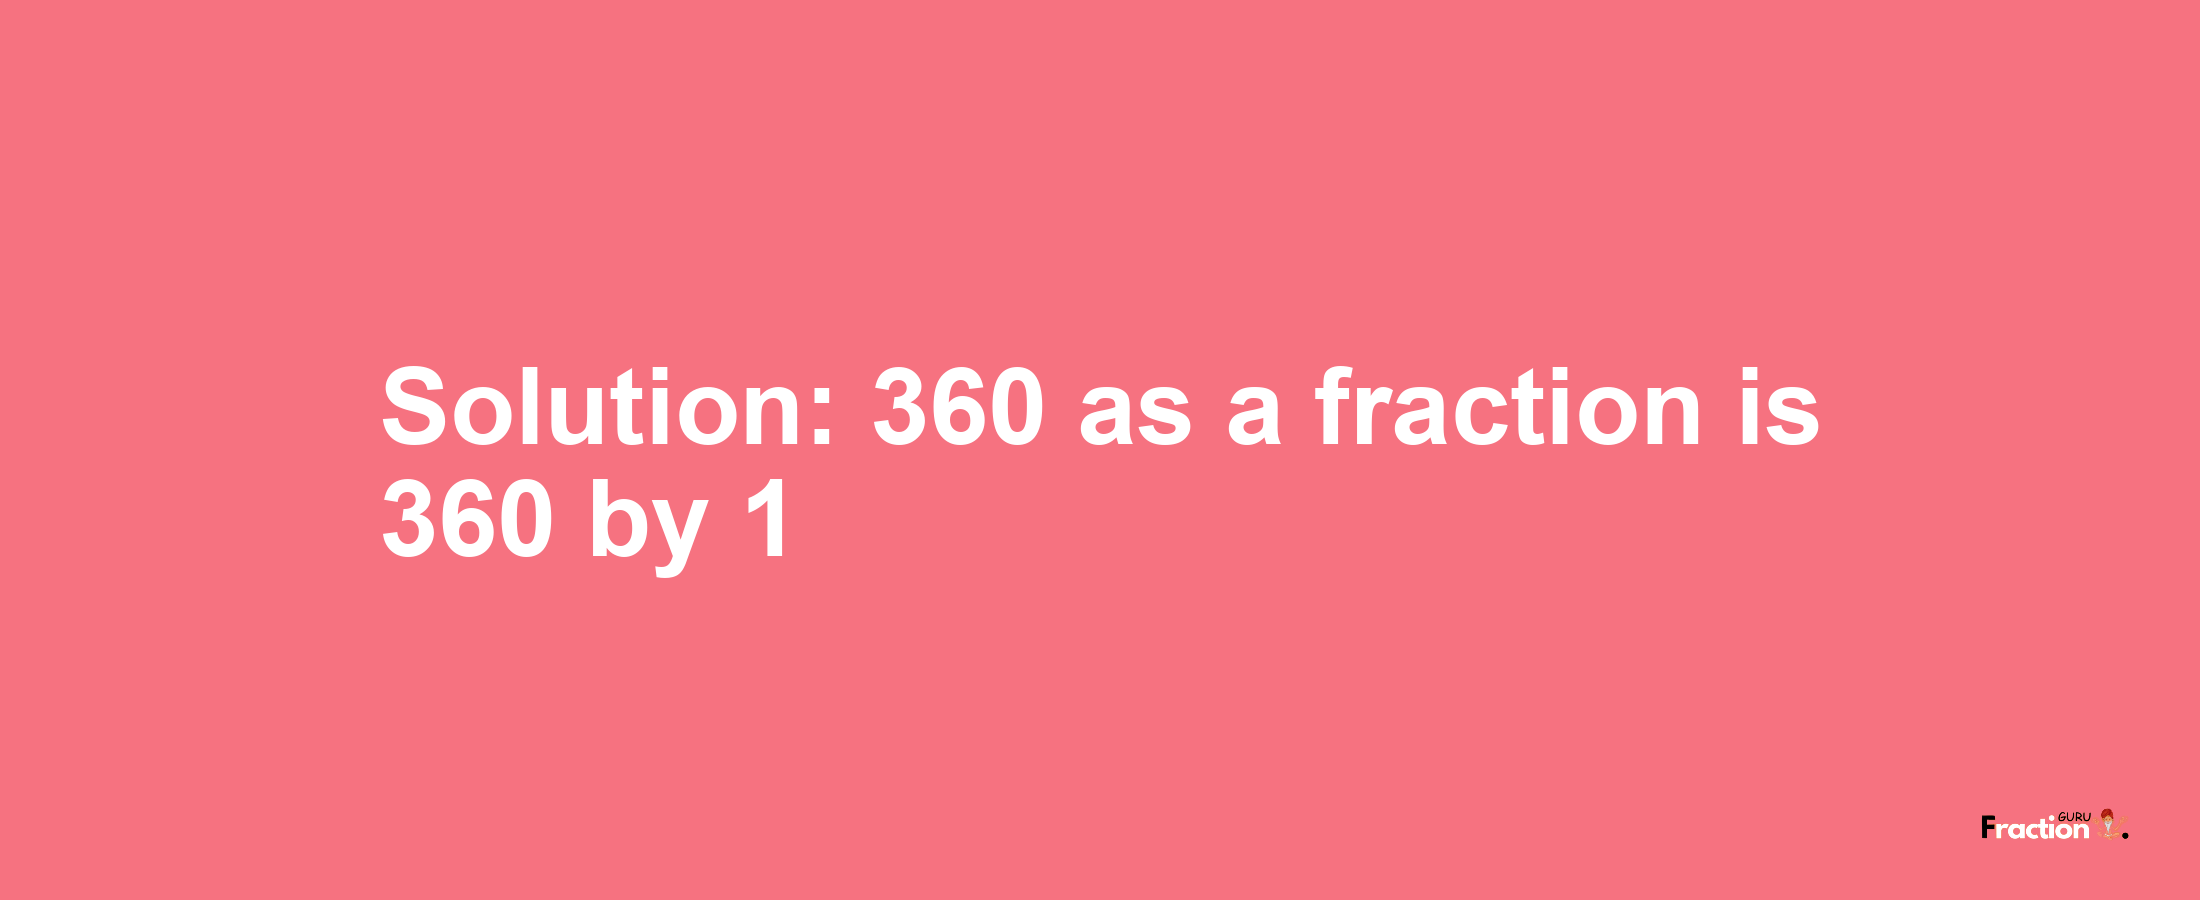 Solution:360 as a fraction is 360/1